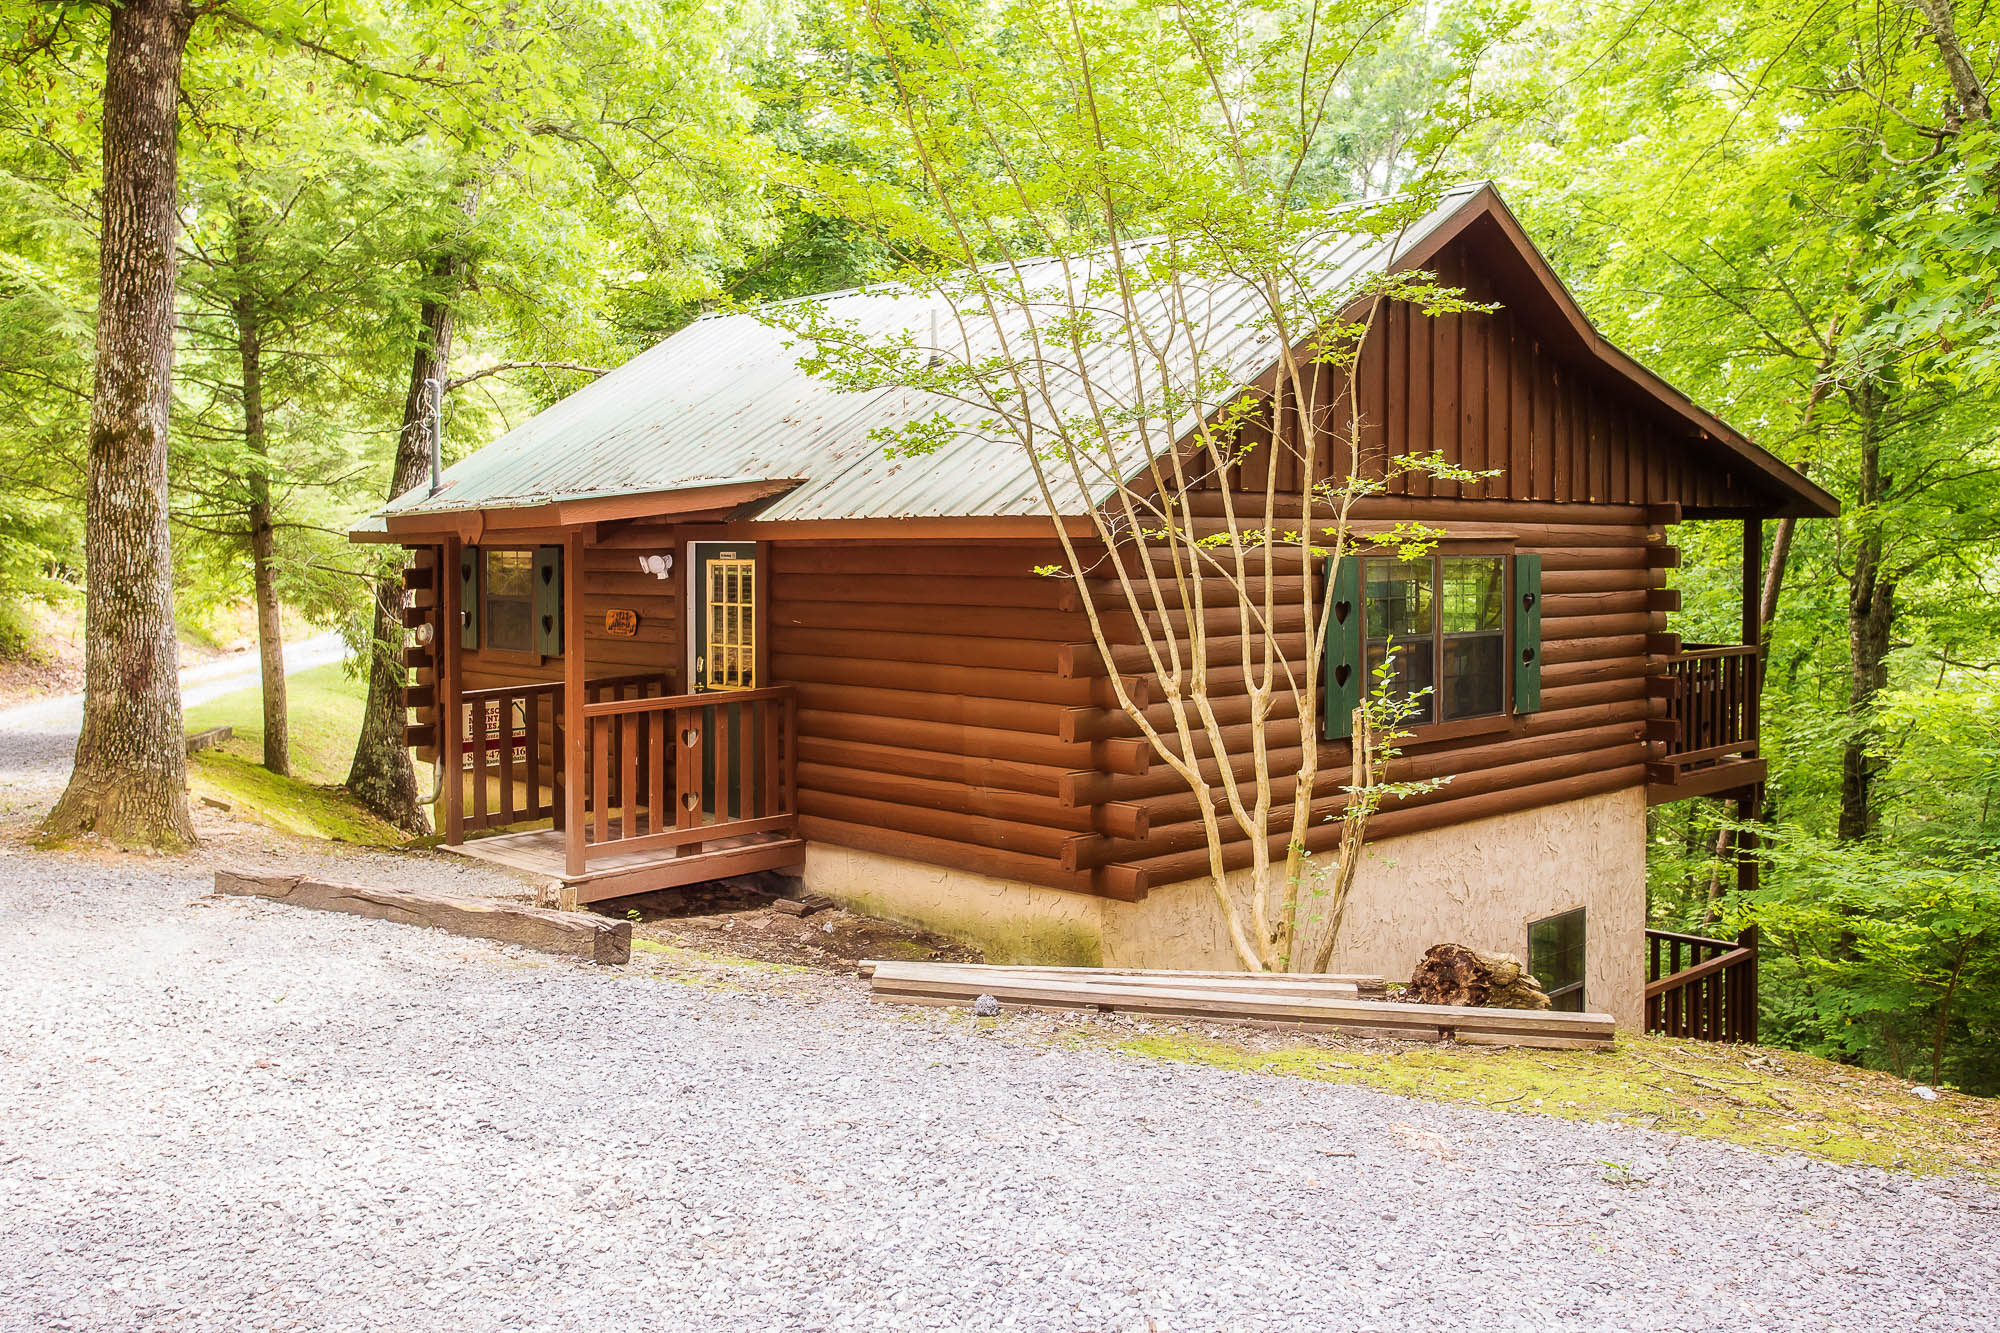 Romancing The Stars: Sevierville Tennessee - 1 Bedroom Vacation Cabin